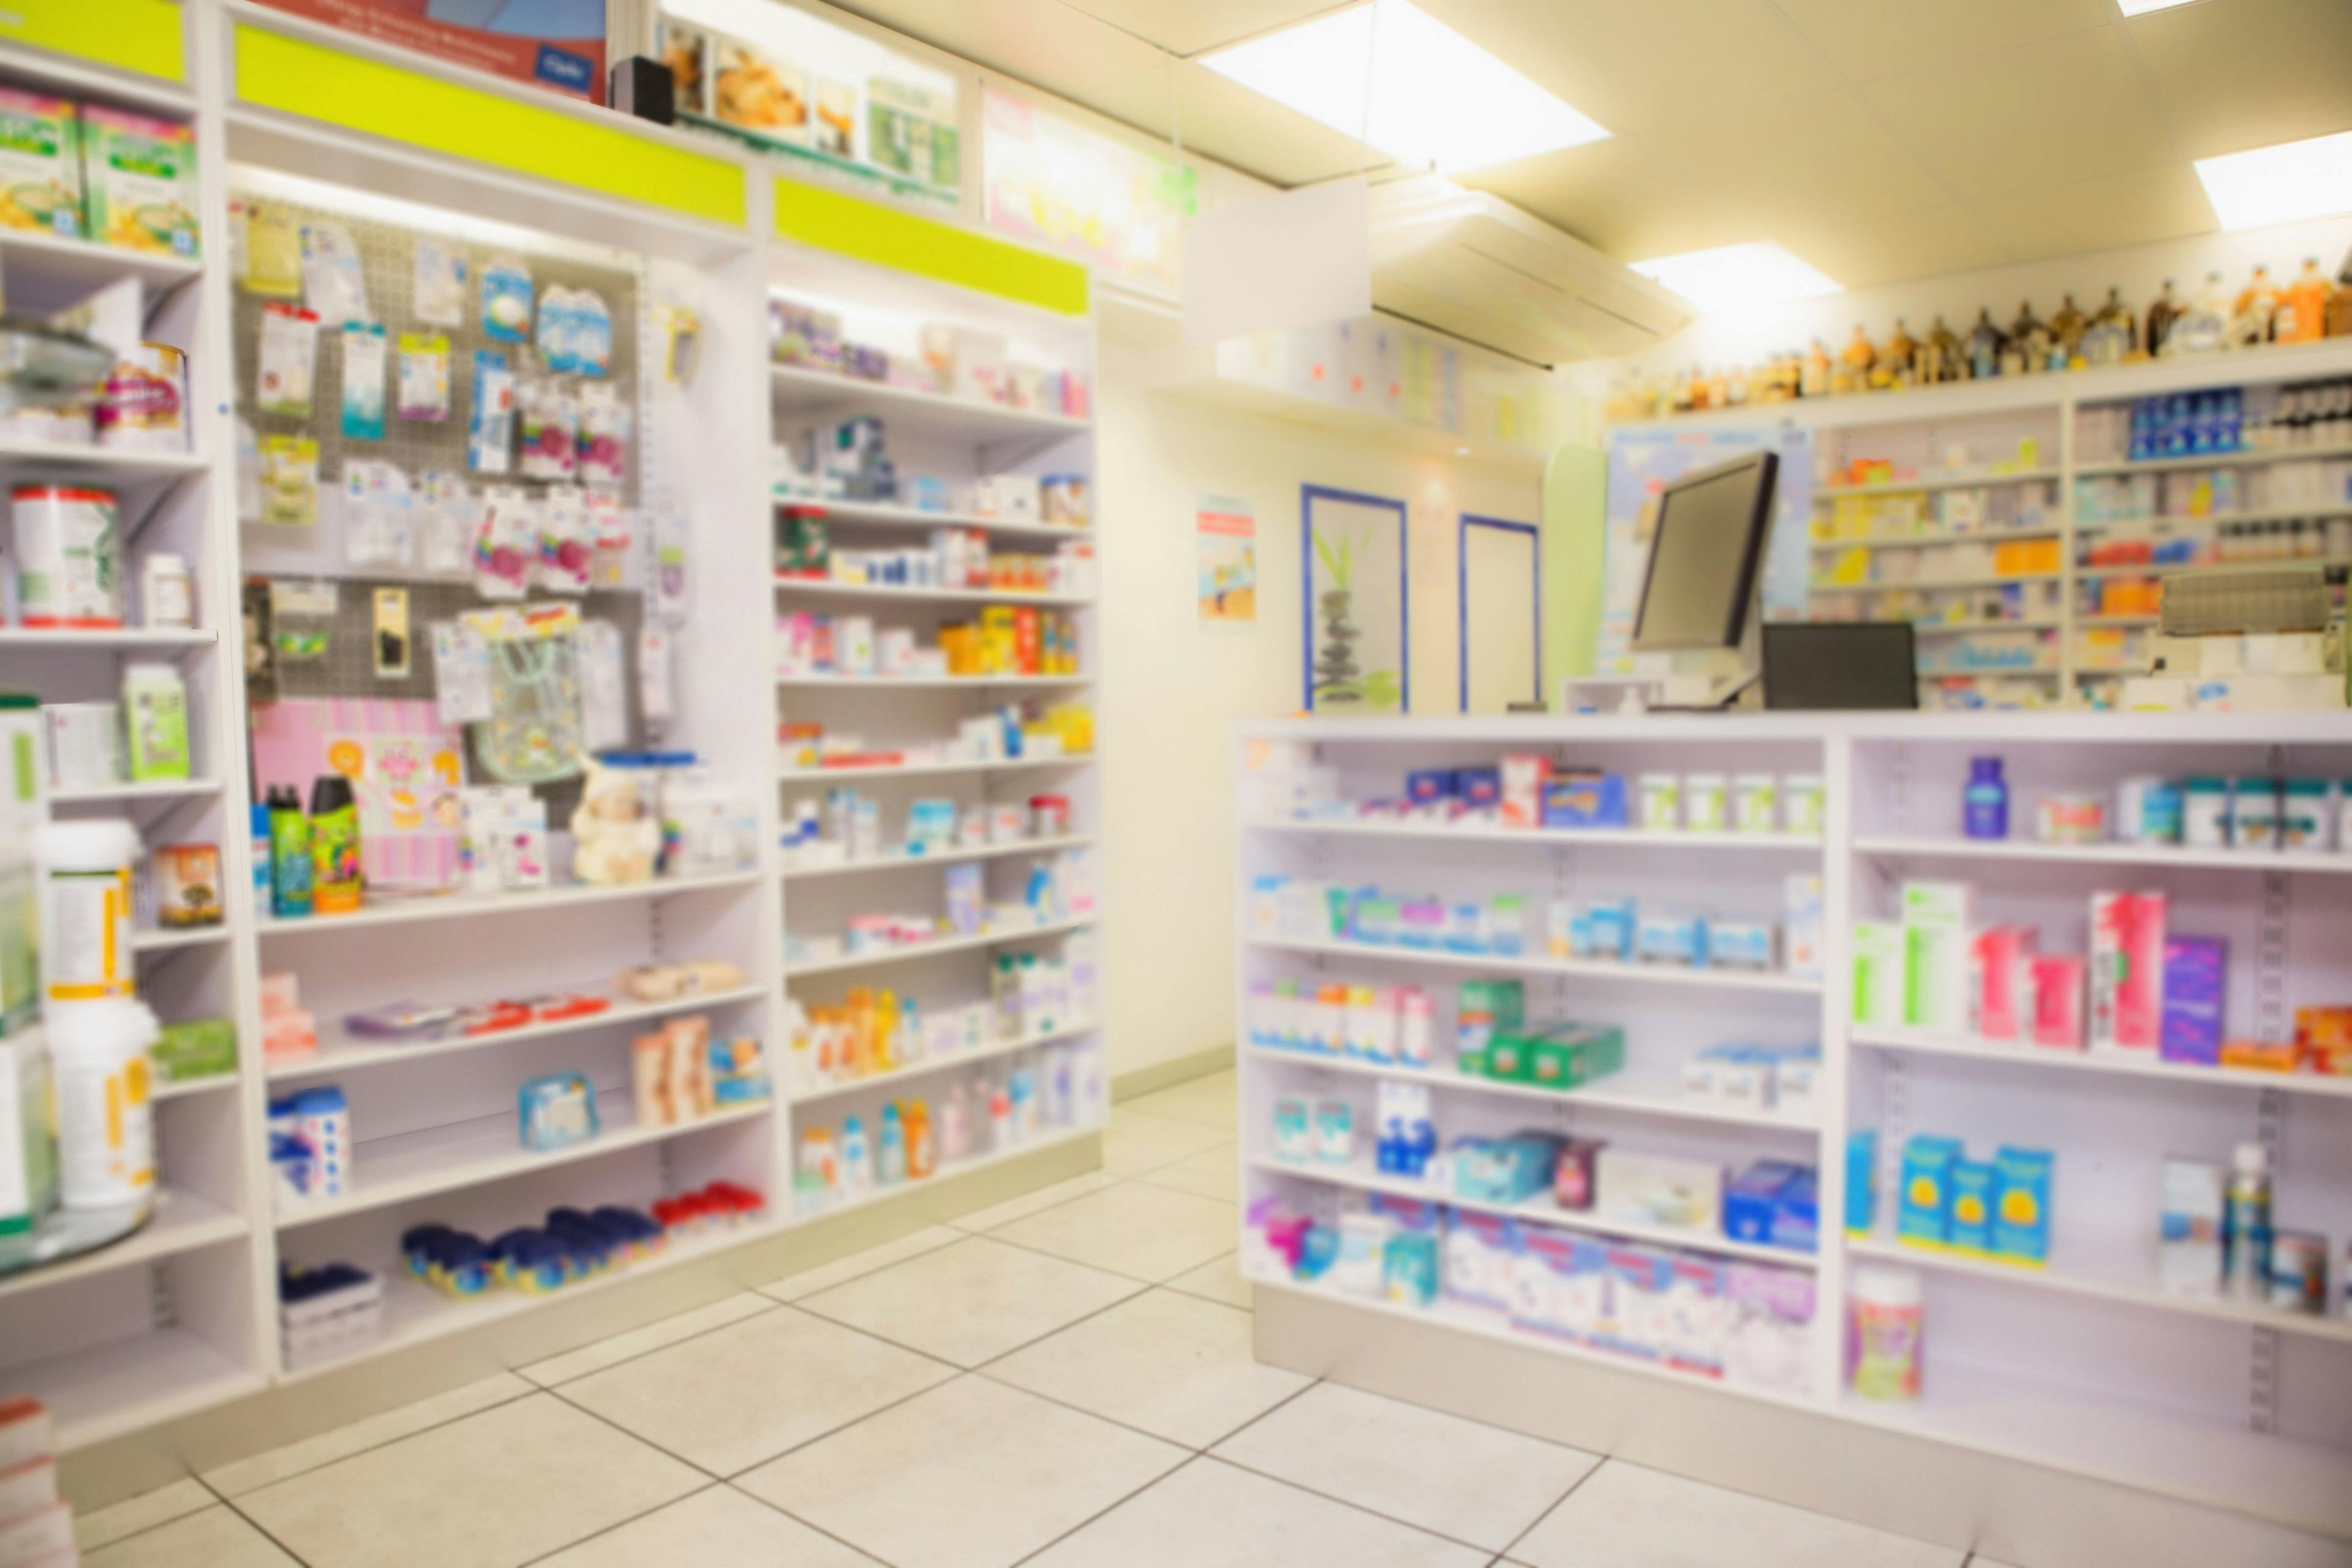 Diversifying the Business of Community Pharmacies During the COVID-19 Pandemic